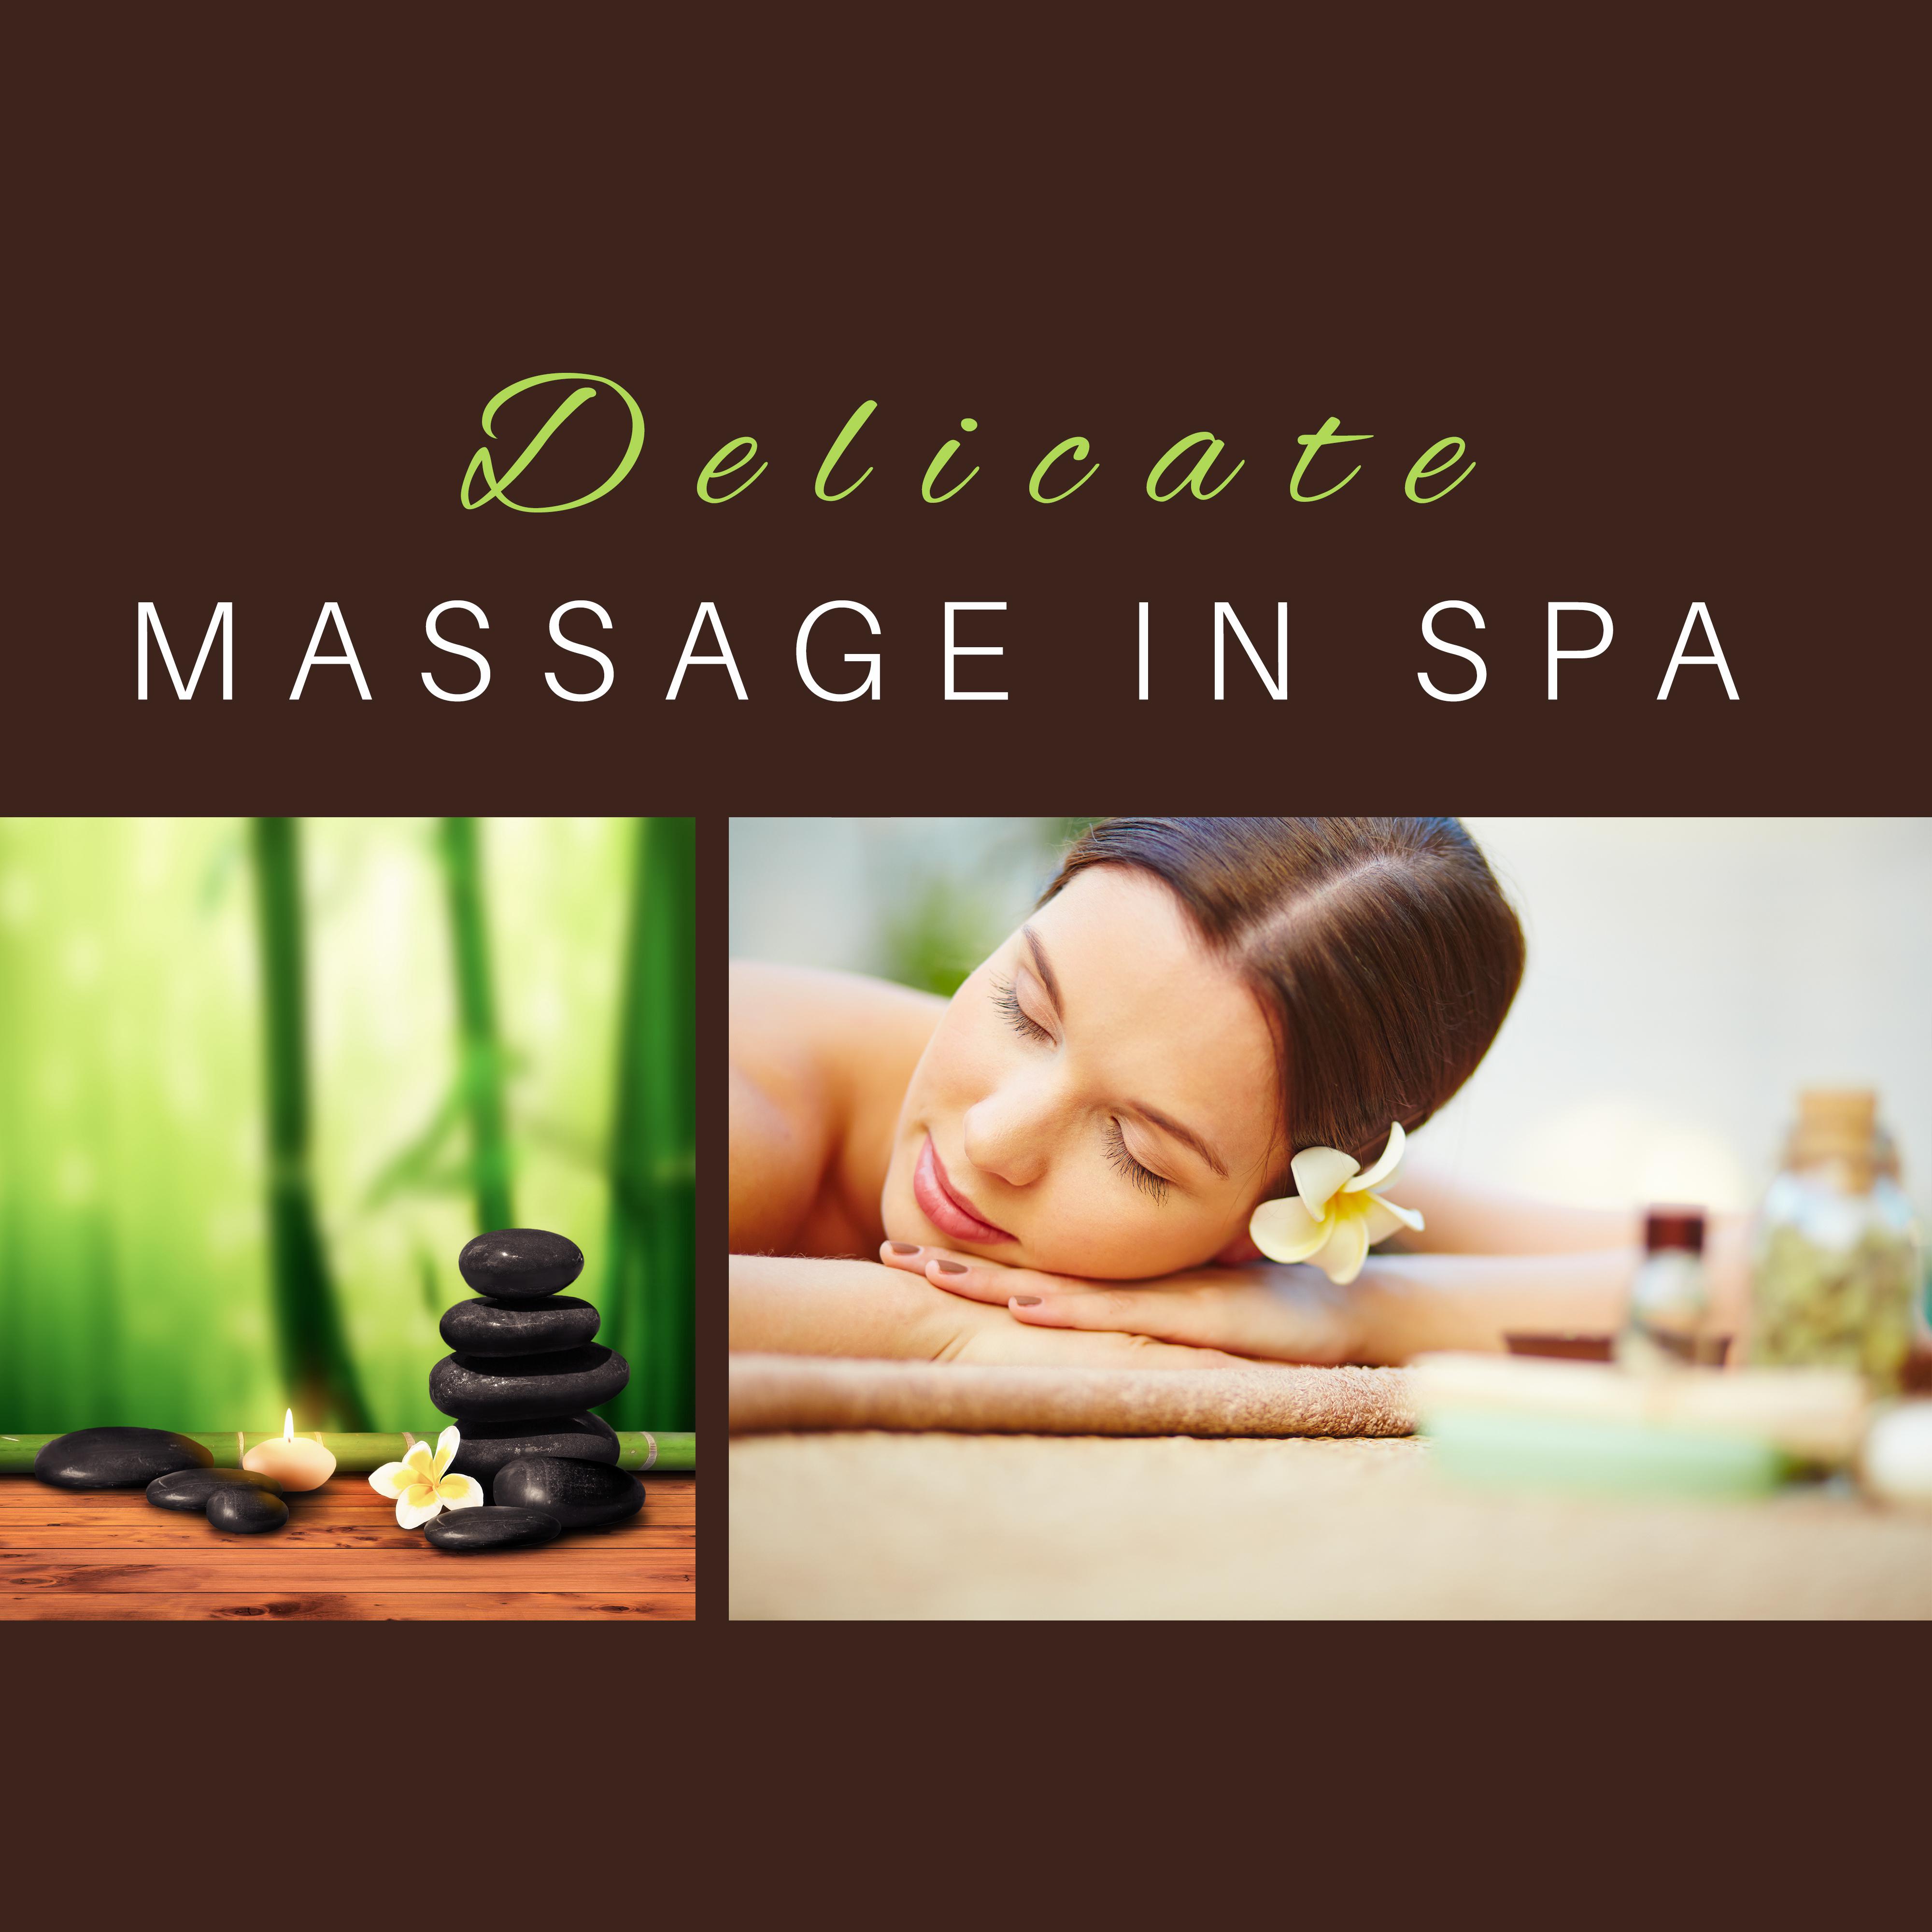 Delicate Massage in Spa  Soft Music for Relaxation, Pure Mind, Healing Spa, Relaxing Therapy, Wellness, Zen Garden